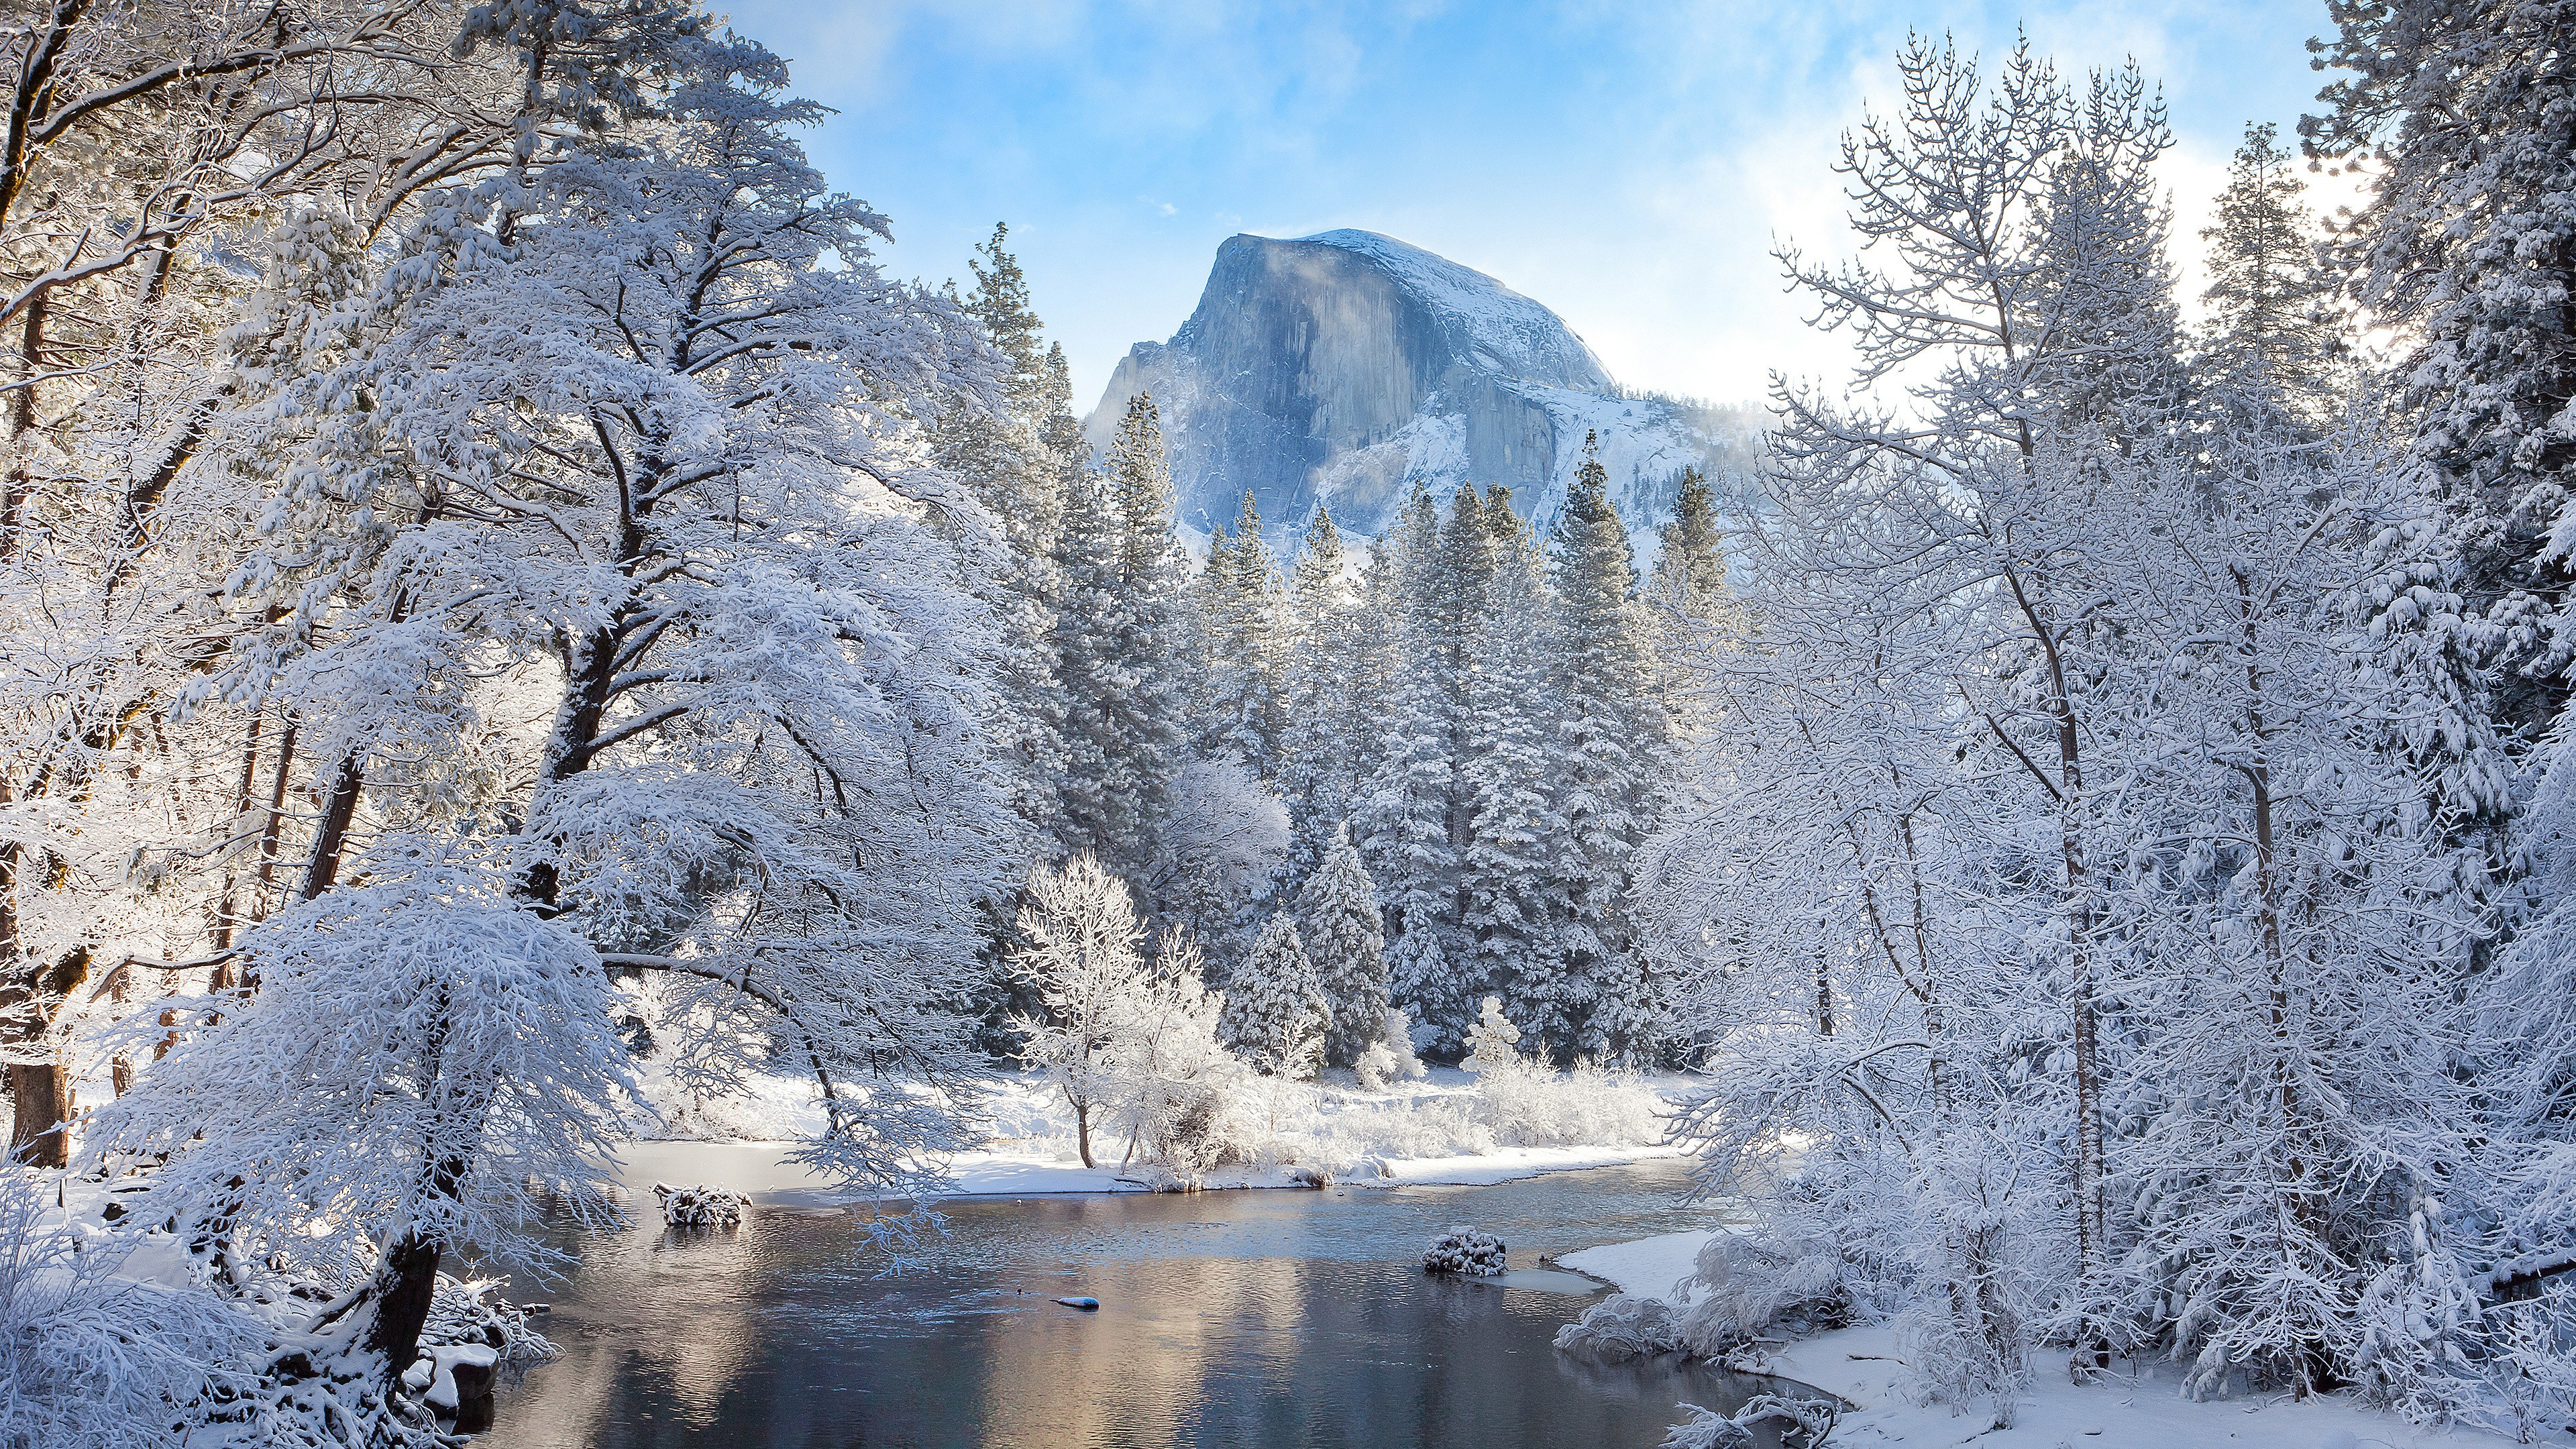 General 3840x2160 landscape nature winter river mountains snowy peak snow frost sky pine trees daylight cold Half Dome Yosemite National Park California USA